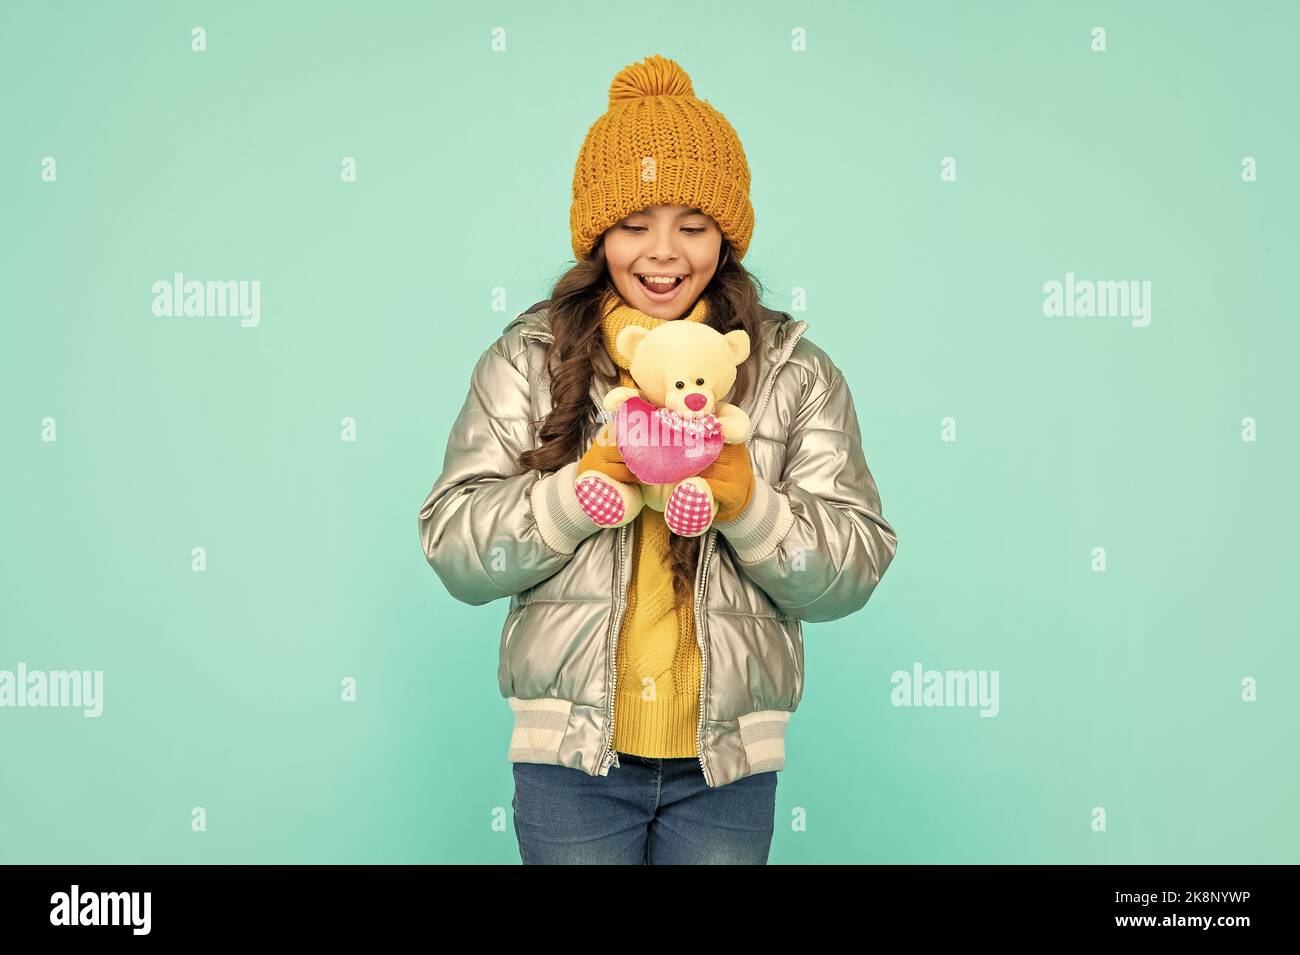 amazed child in hat and puffer jacket with toy on blue background, valentines day Stock Photo